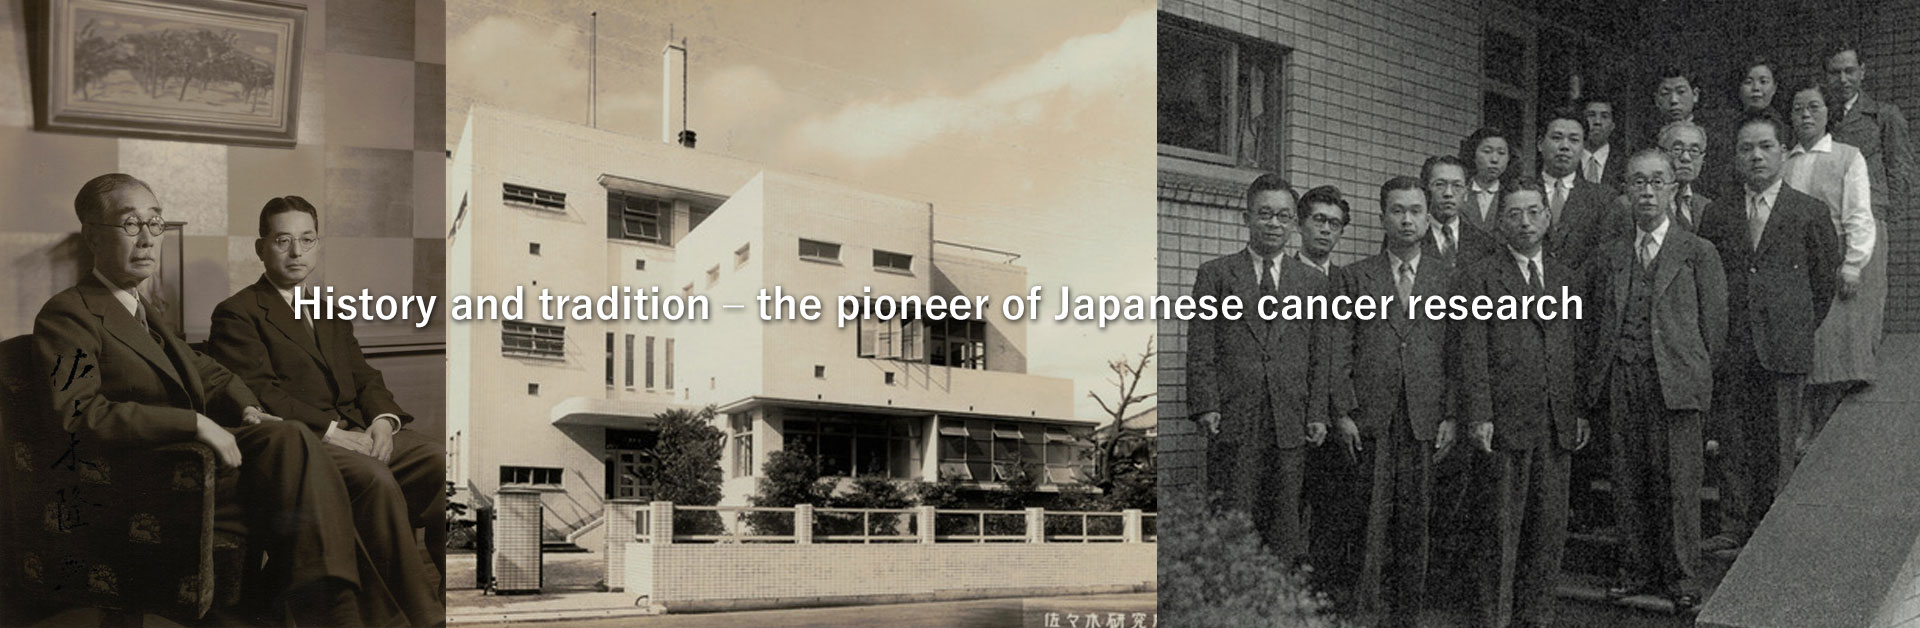 History and tradition – the pioneer of Japanese cancer research